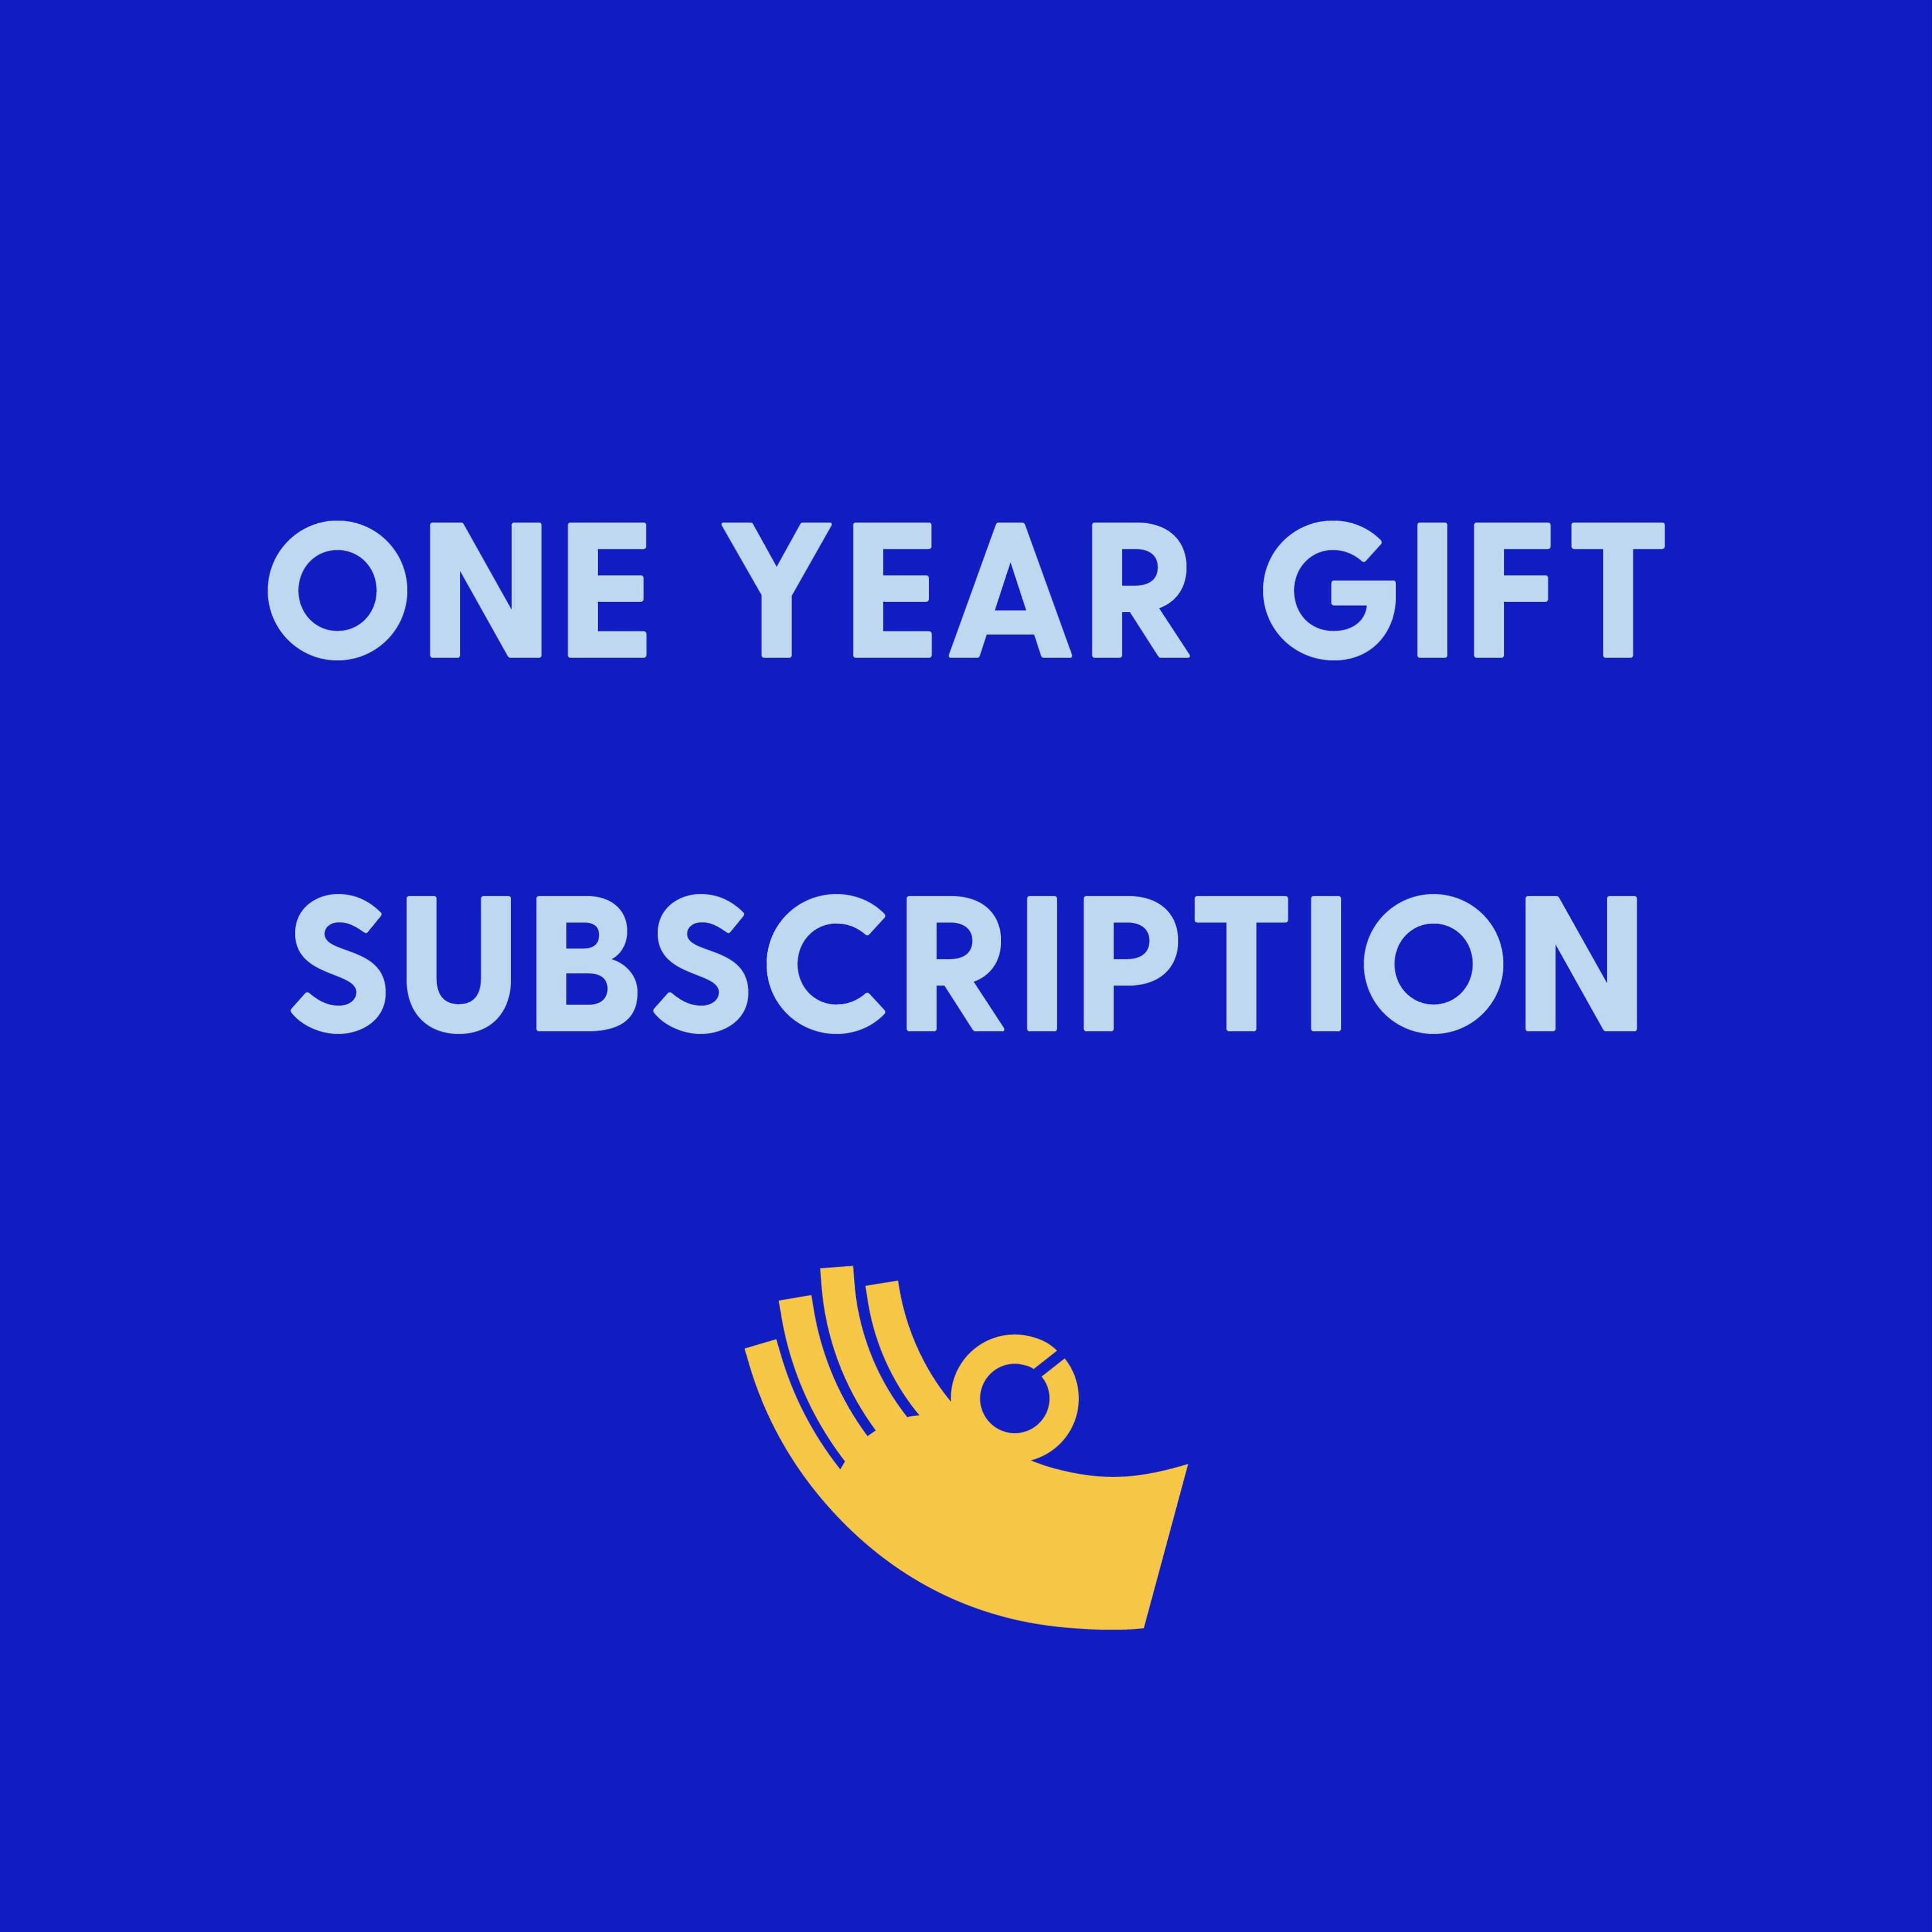 One Year Gift Subscription